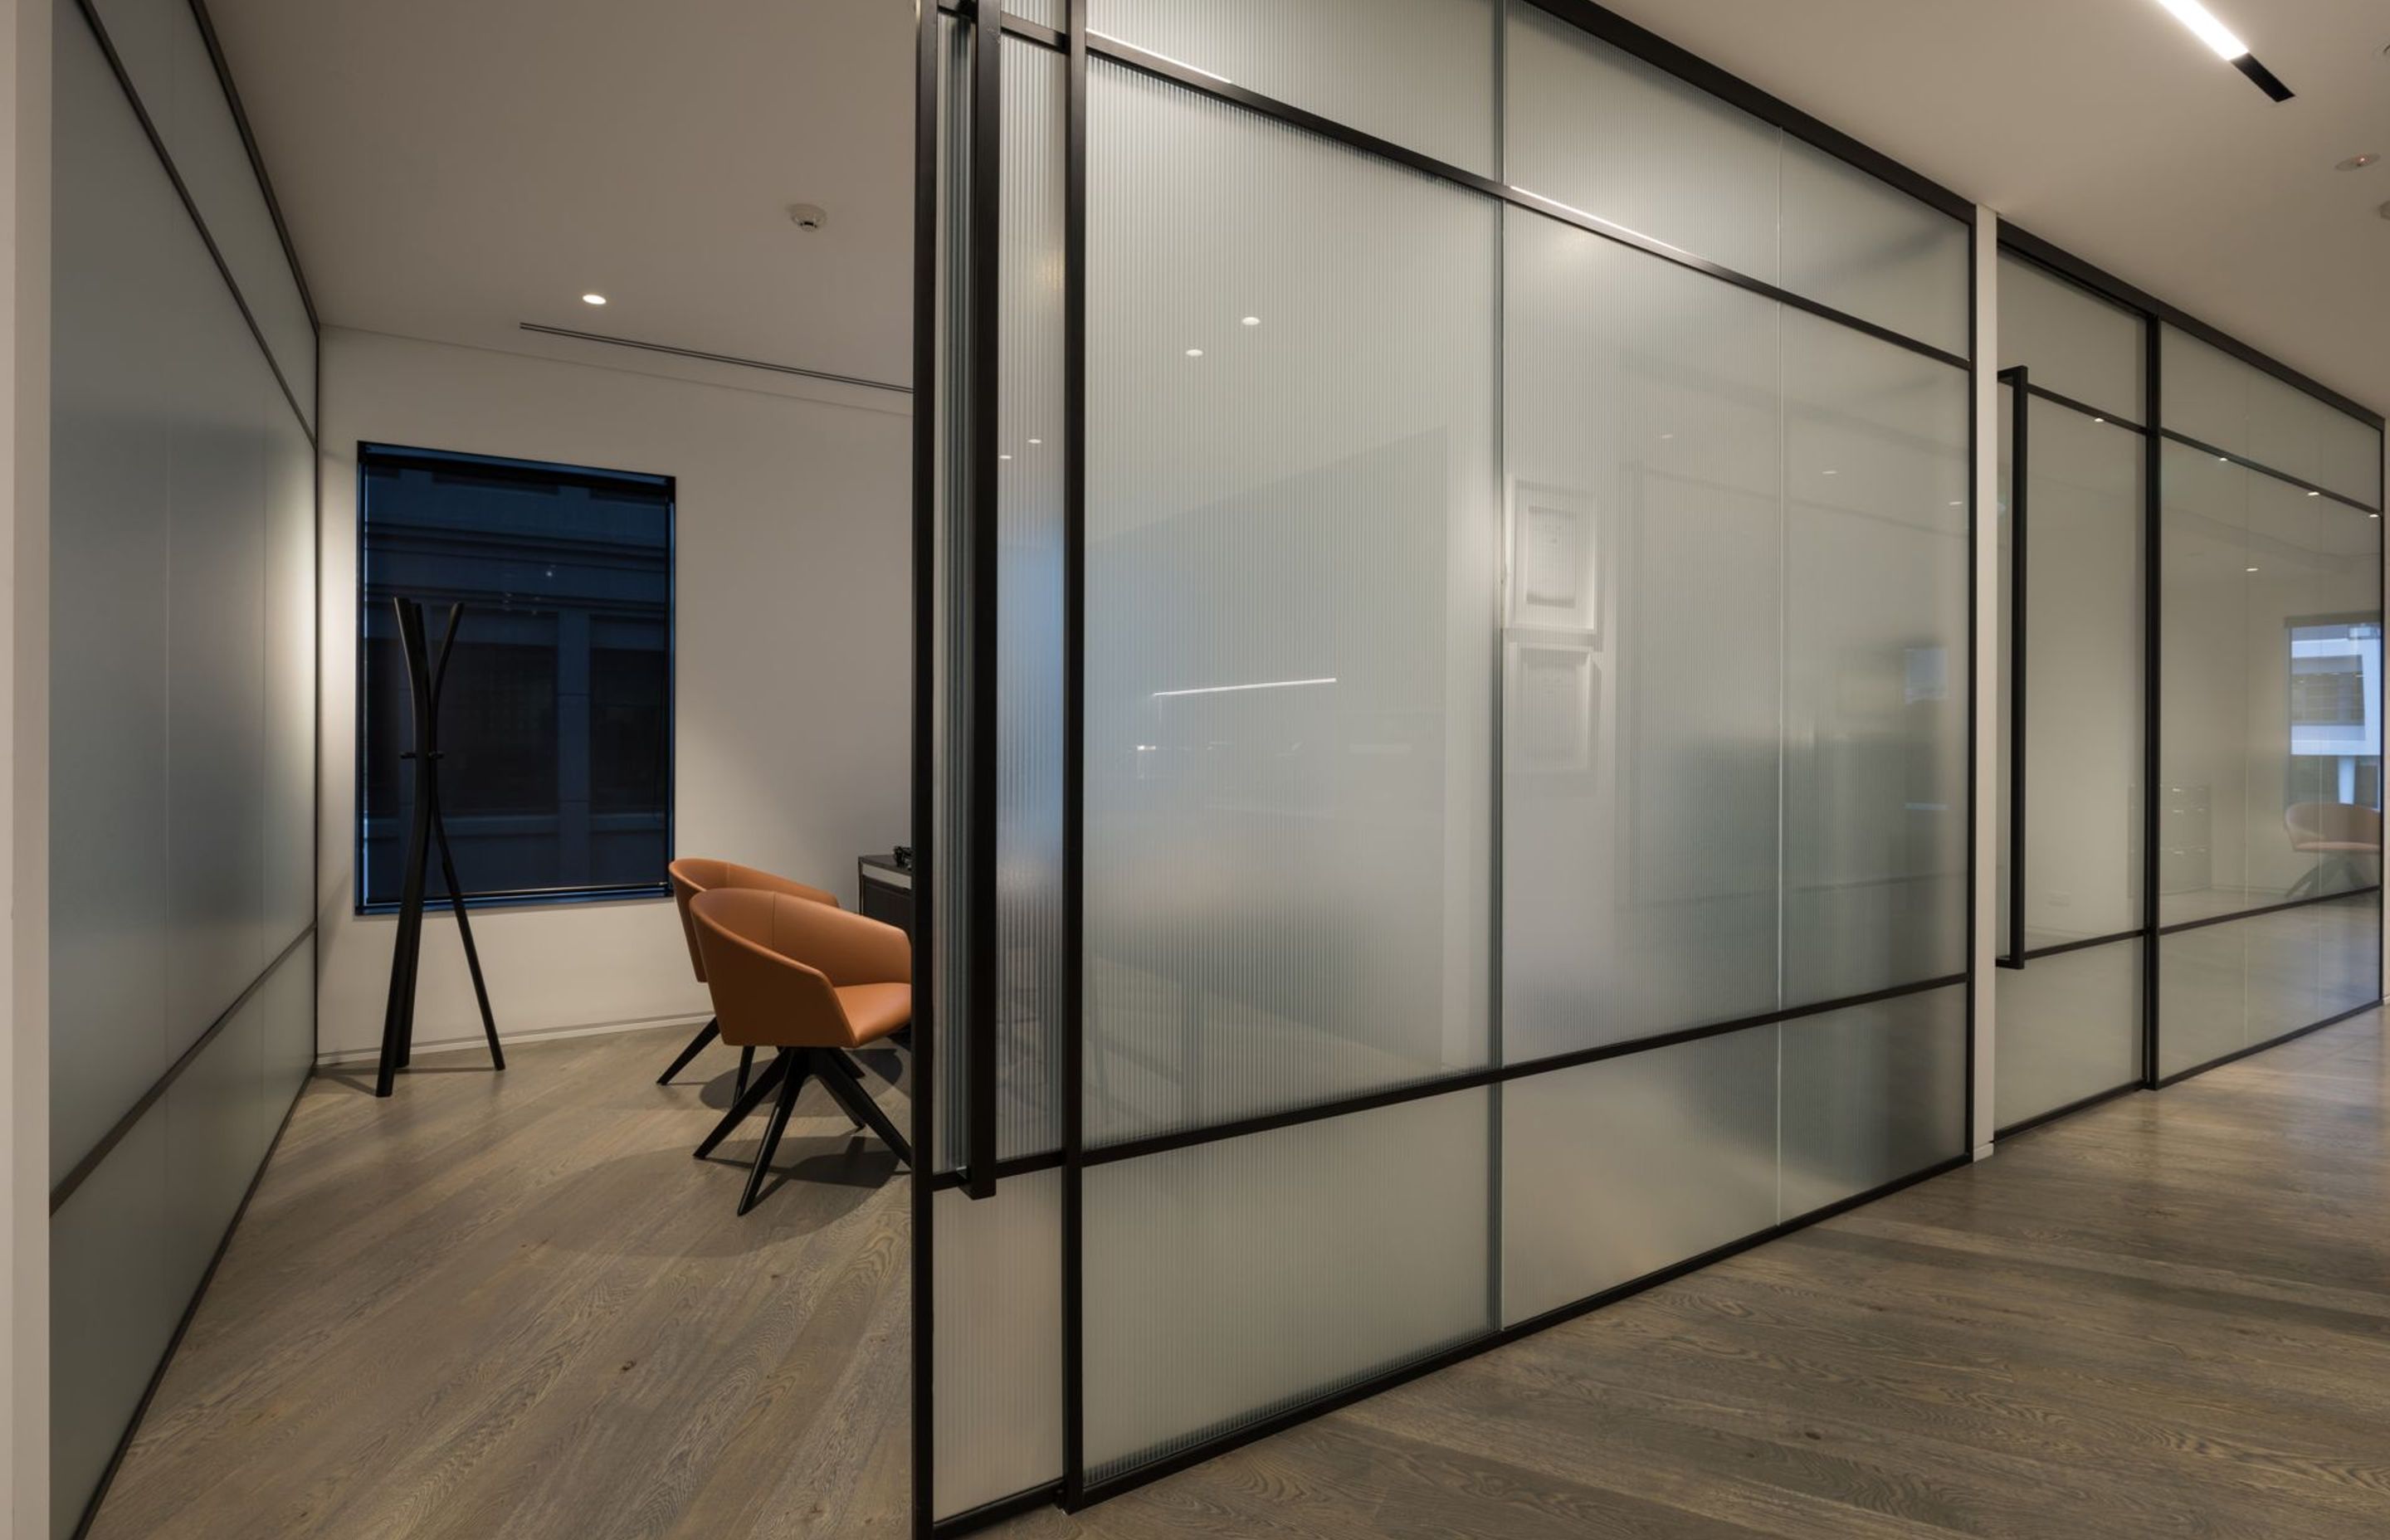 Office partition walls crafted in steel and reeded pattern glazing allowing perimeter natural loght to filter into circulation areas.